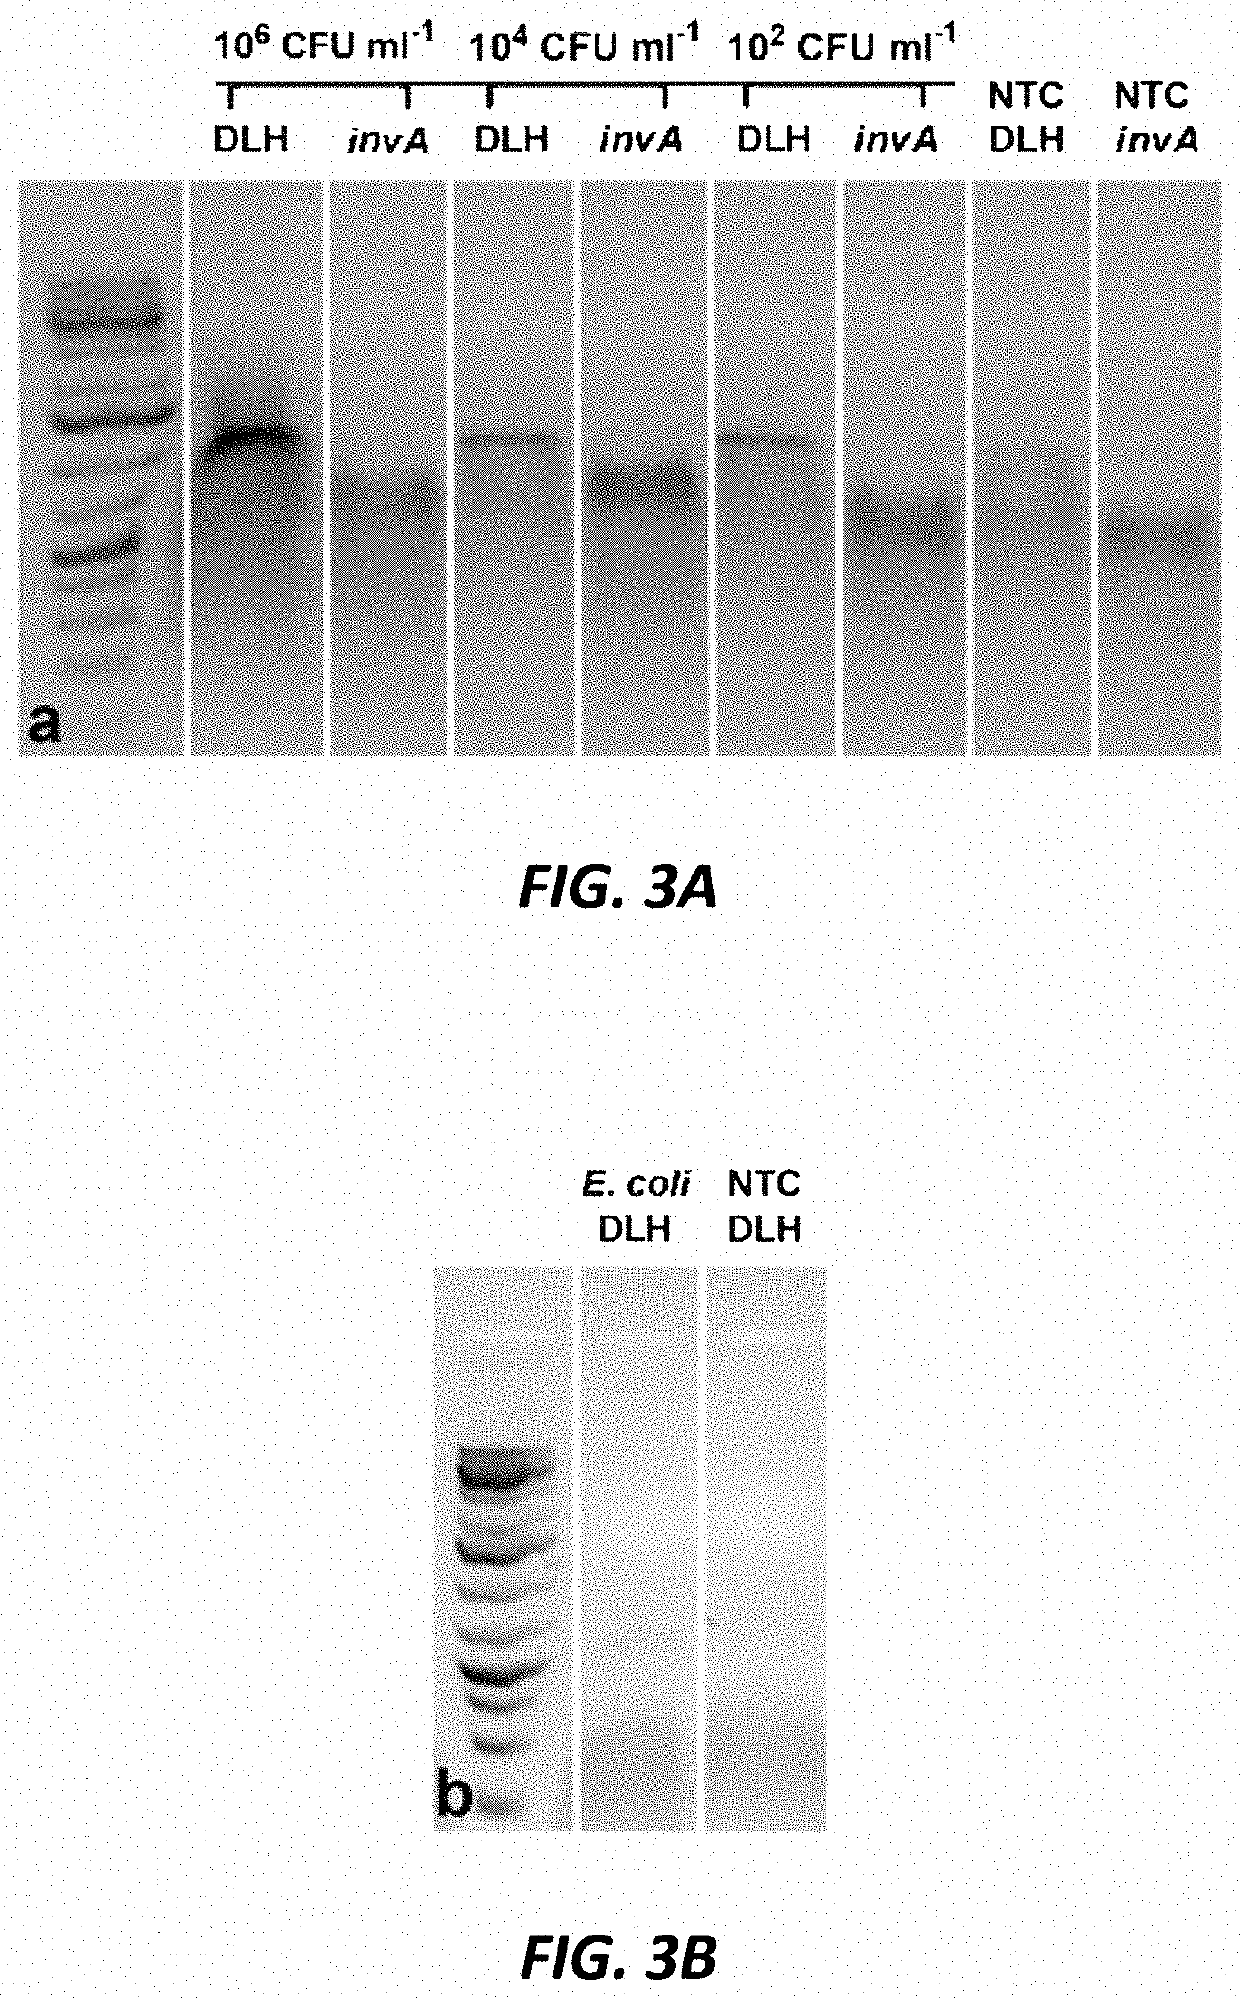 Capturing, concentrating, and detecting microbes in a sample using magnetic ionic liquids and recombinase polymerase amplification